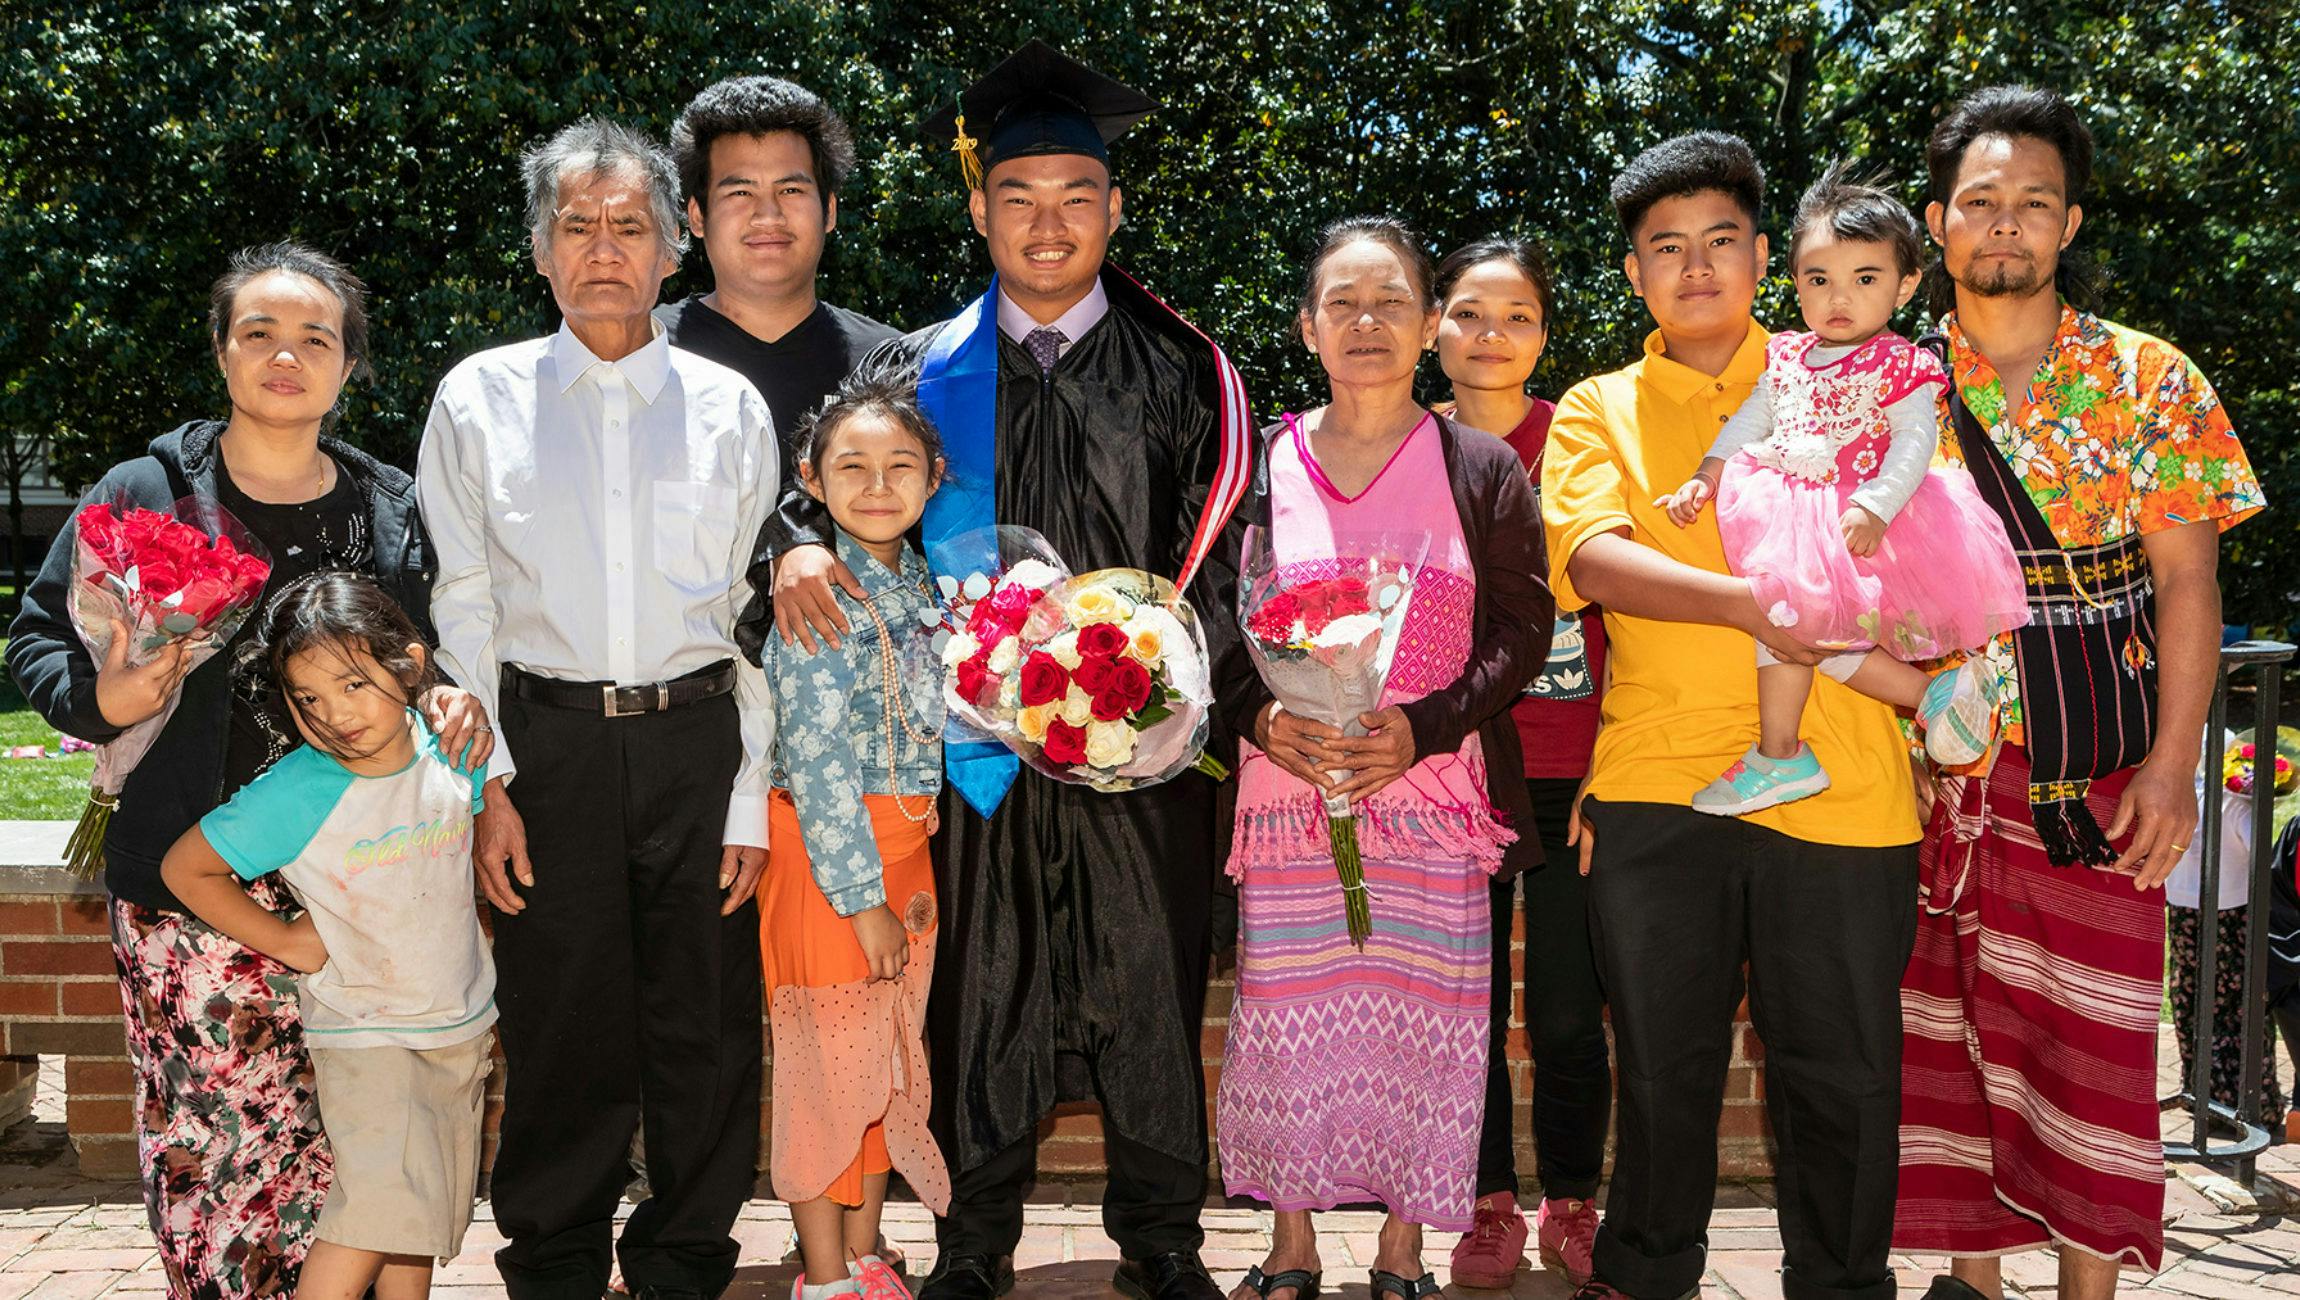 Graduating seniors and their families at the Fugees Academy in Clarkston, Georgia, in 2019. Credit: Clyde Click